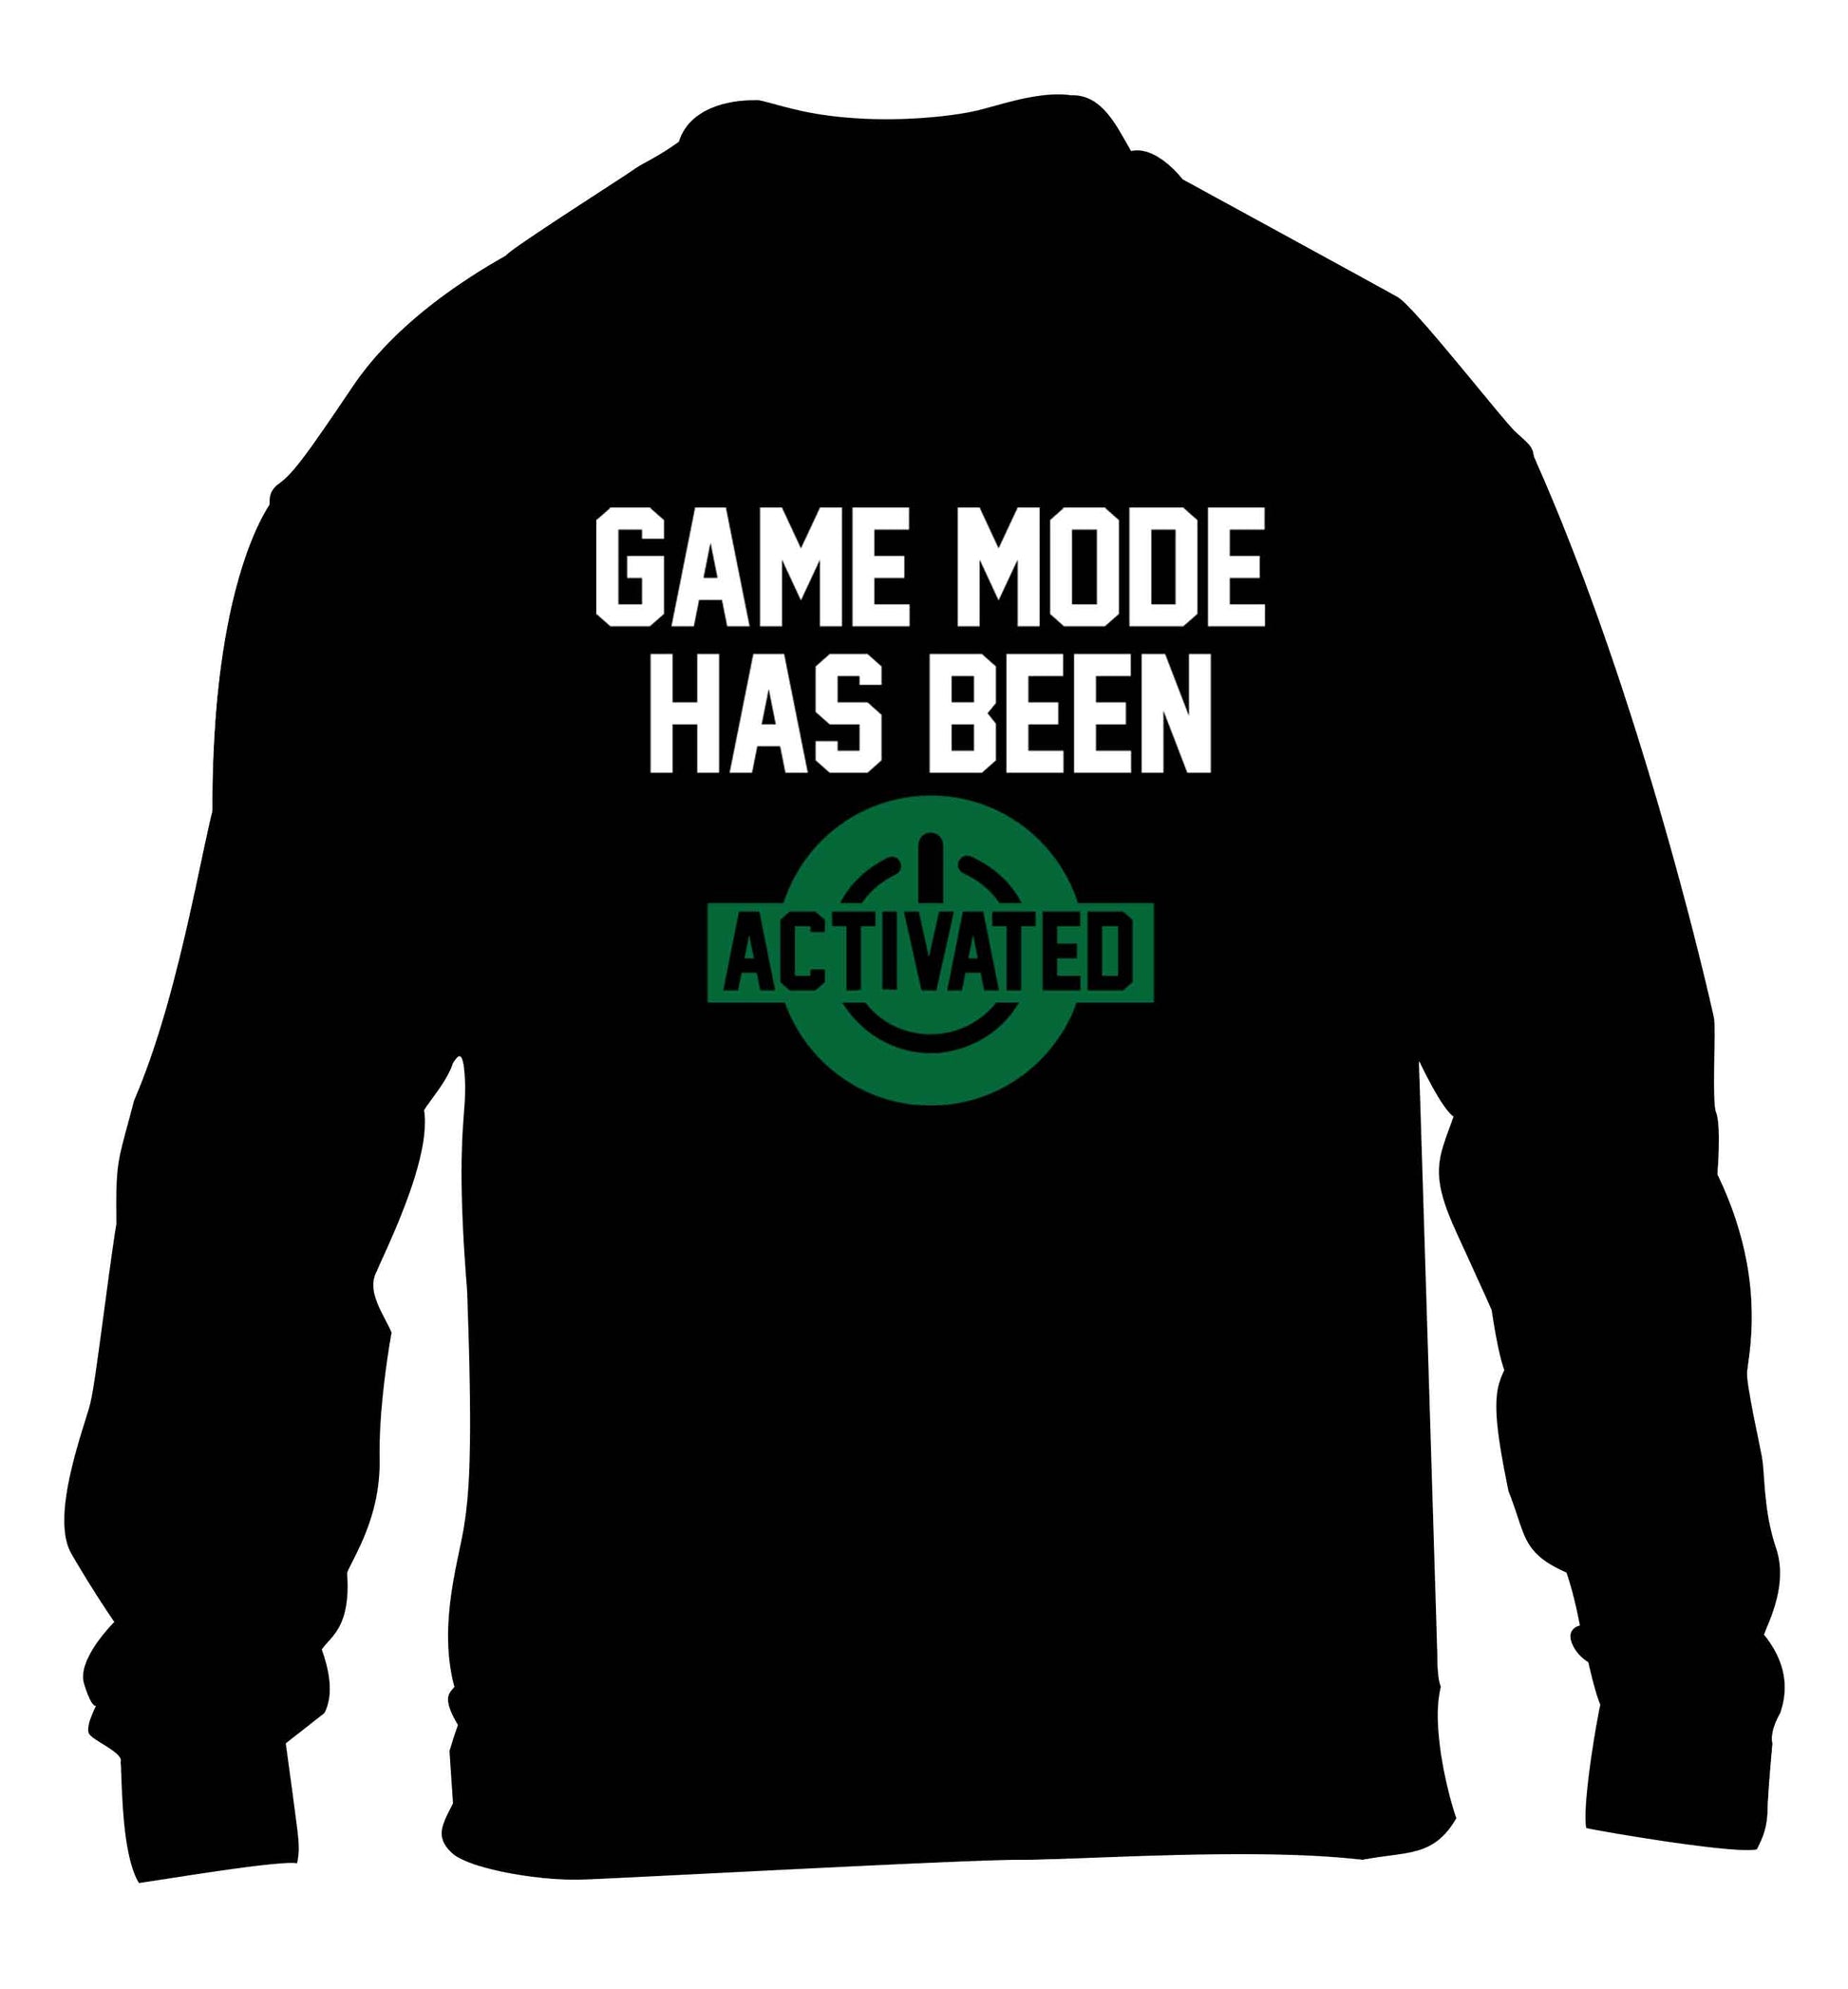 Game mode has been activated children's black sweater 12-13 Years